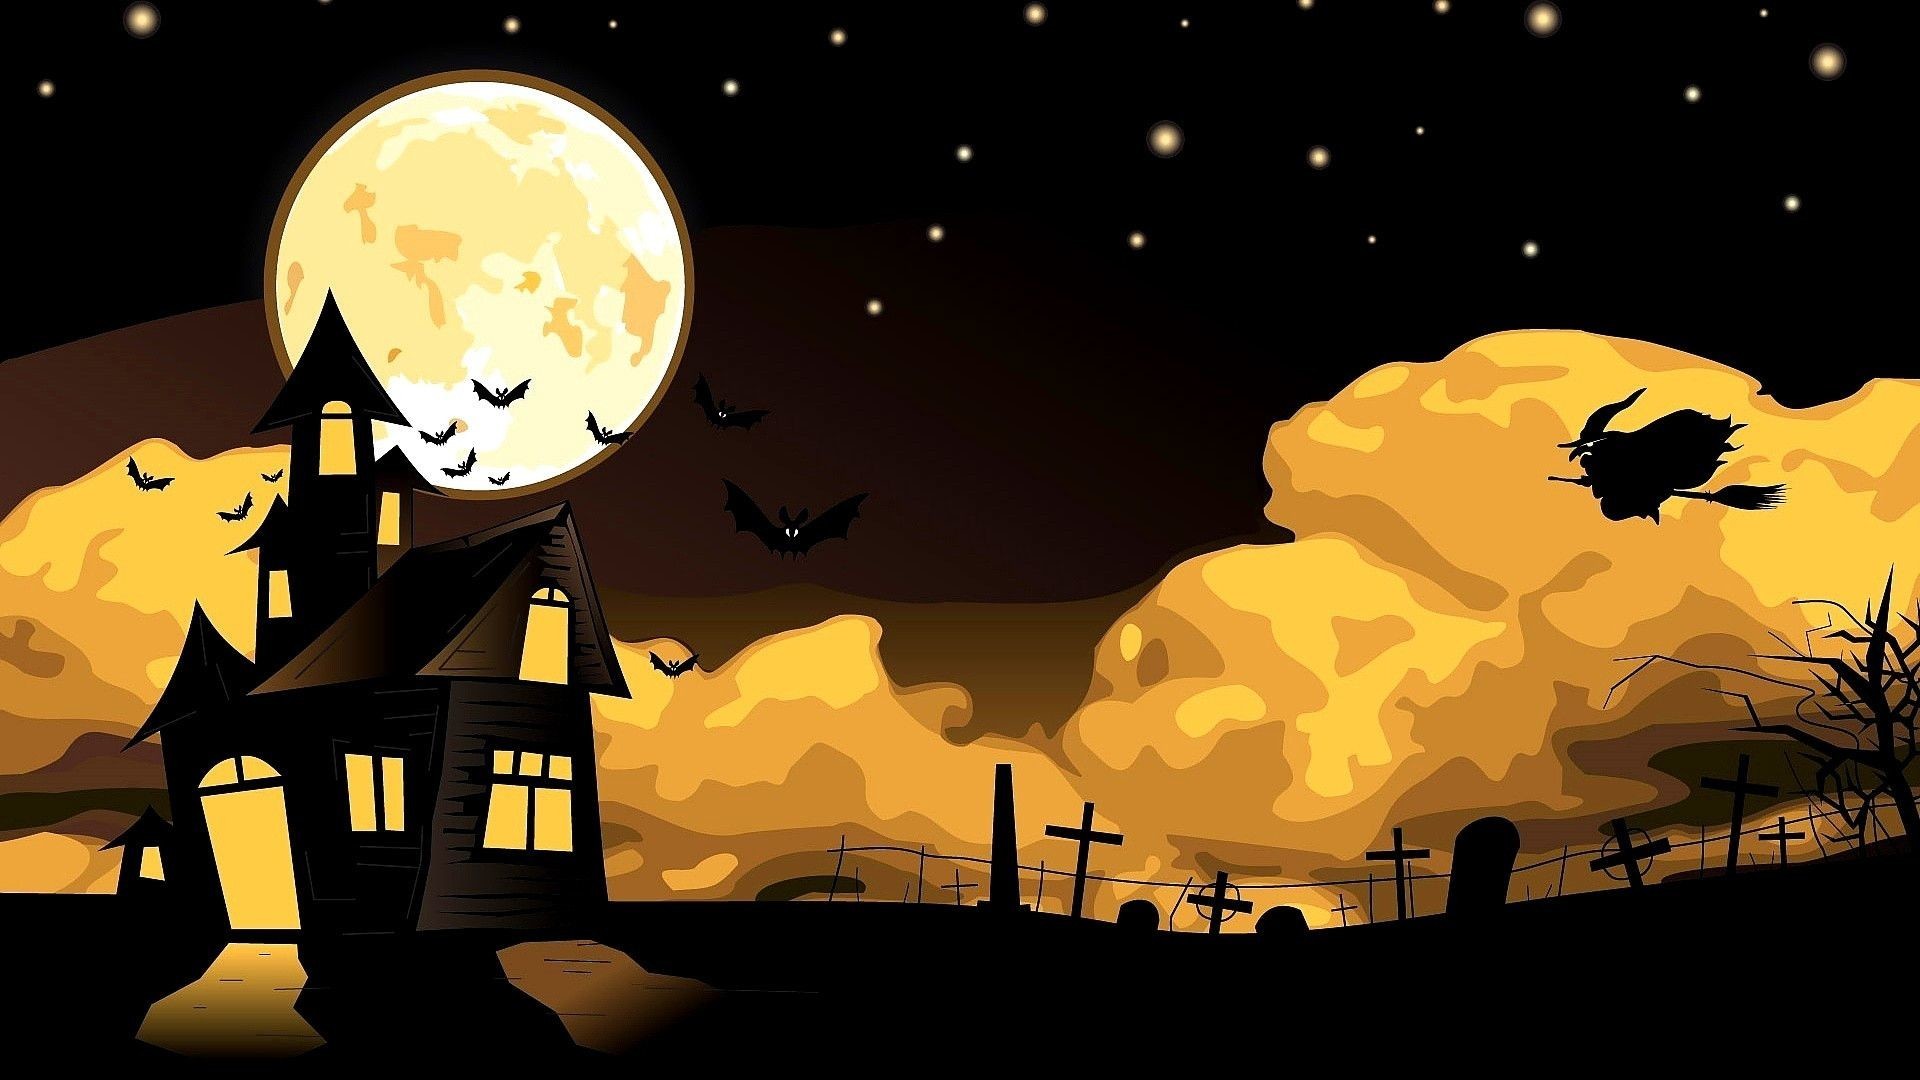 1920x1080  Happy Halloween Backgrounds Images 2017 for iPhone Wallpaper